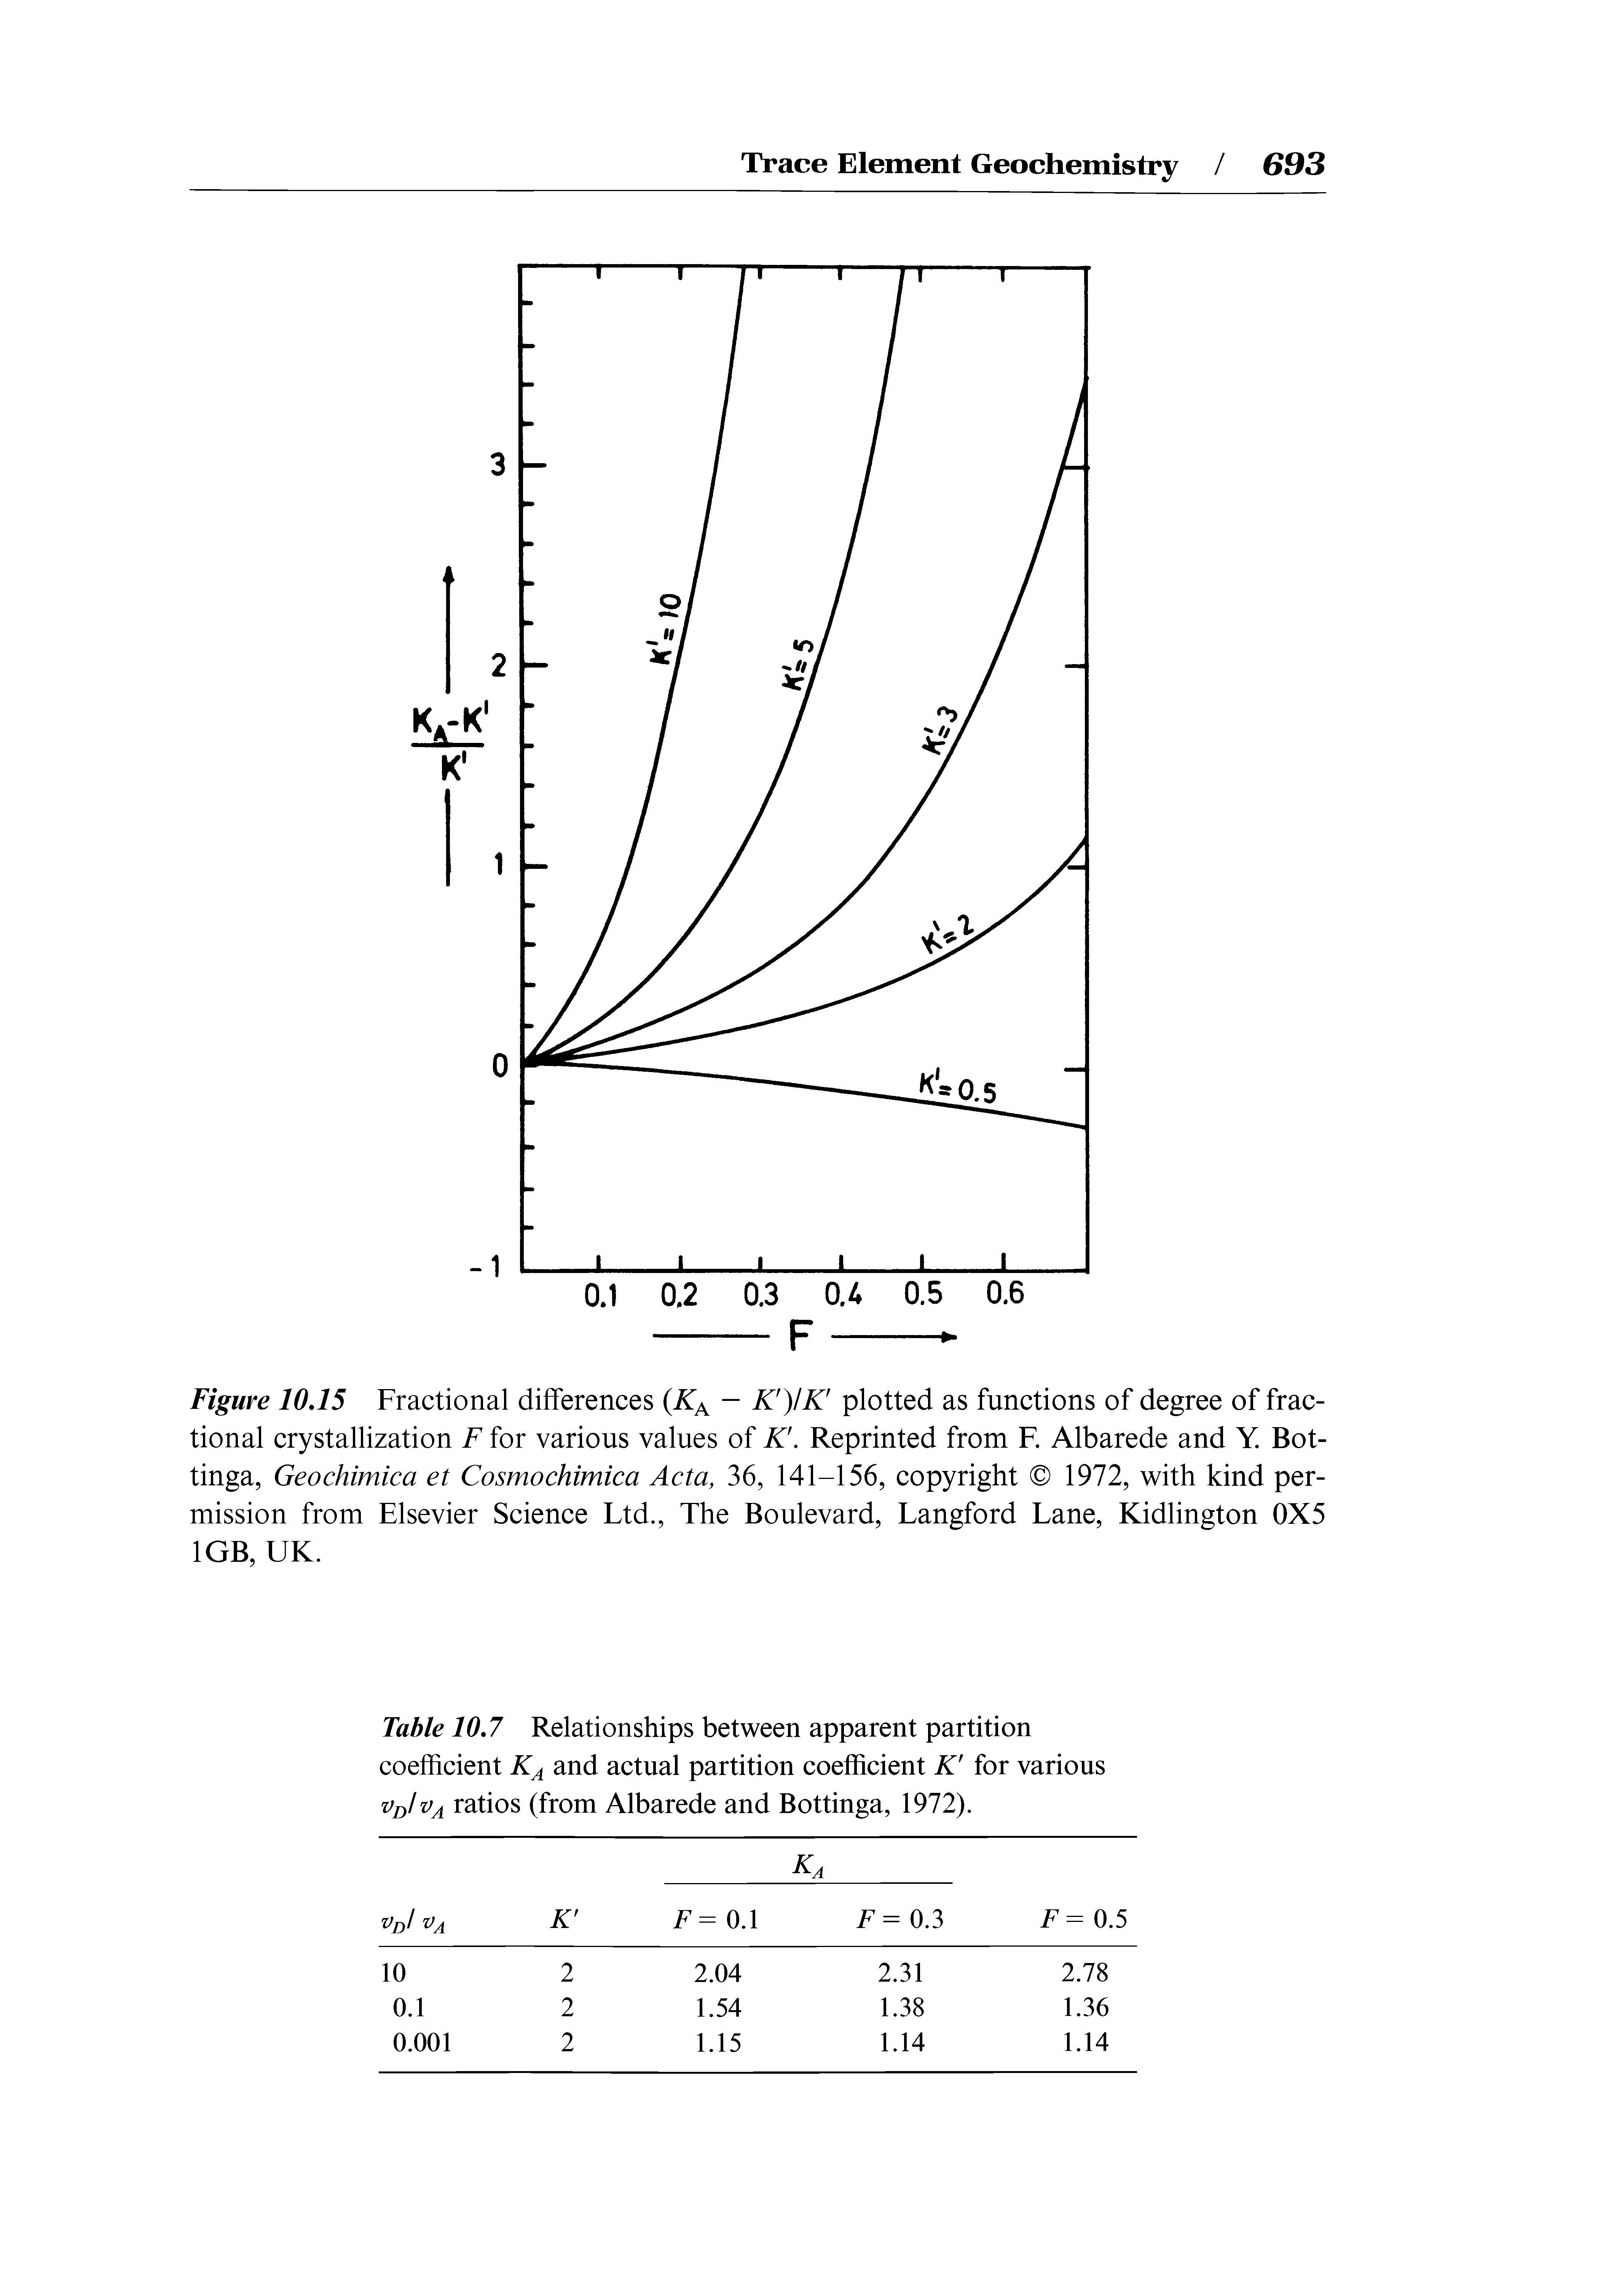 Table 10.7 Relationships between apparent partition coefficient and actual partition coefficient K for various ratios (from Albarede and Bottinga, 1972).